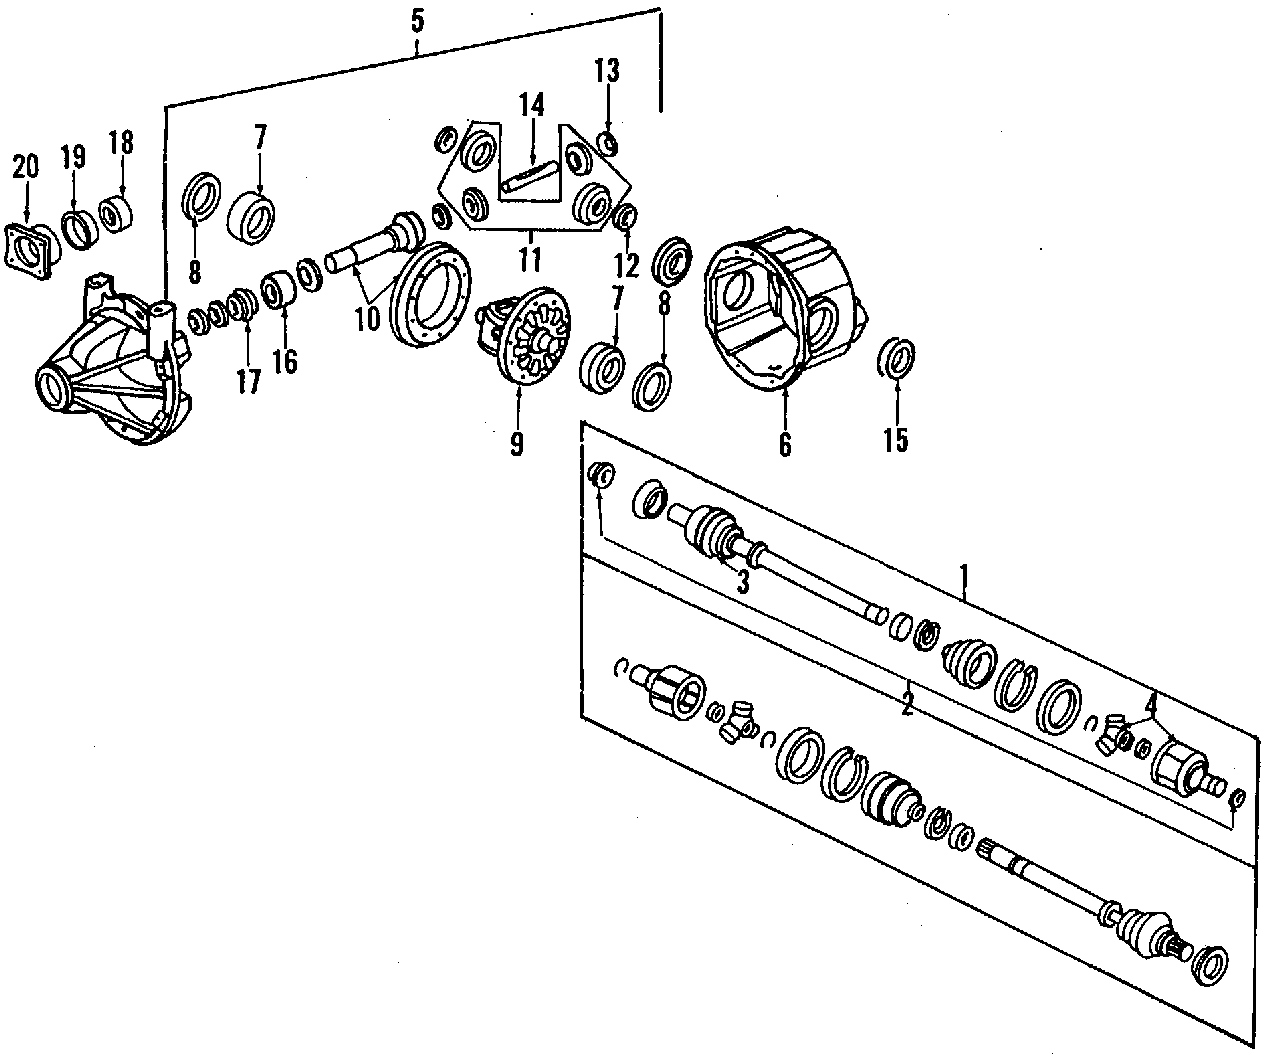 4REAR AXLE. AXLE SHAFTS & JOINTS. DIFFERENTIAL. PROPELLER SHAFT.https://images.simplepart.com/images/parts/motor/fullsize/F640360.png